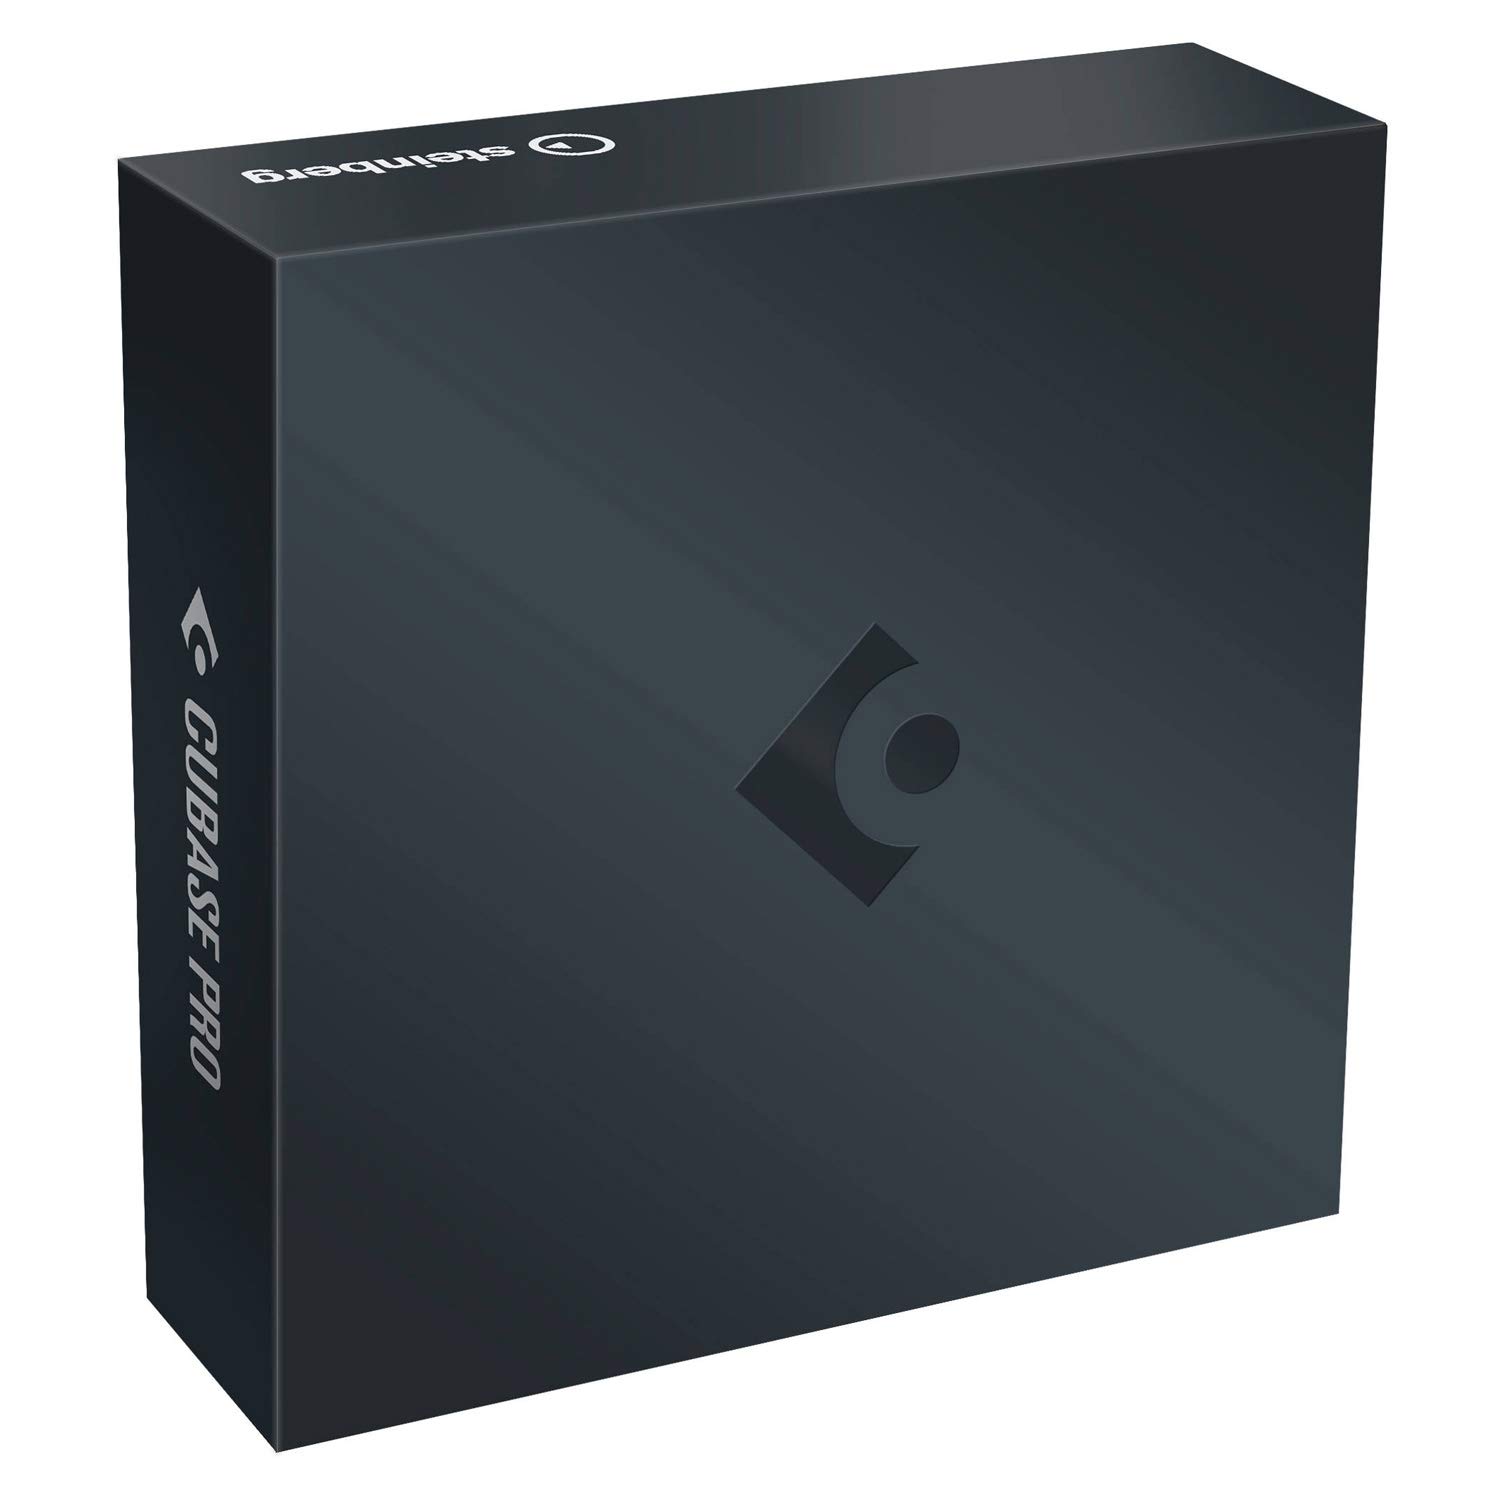 cubase 7 update from 5 torrent